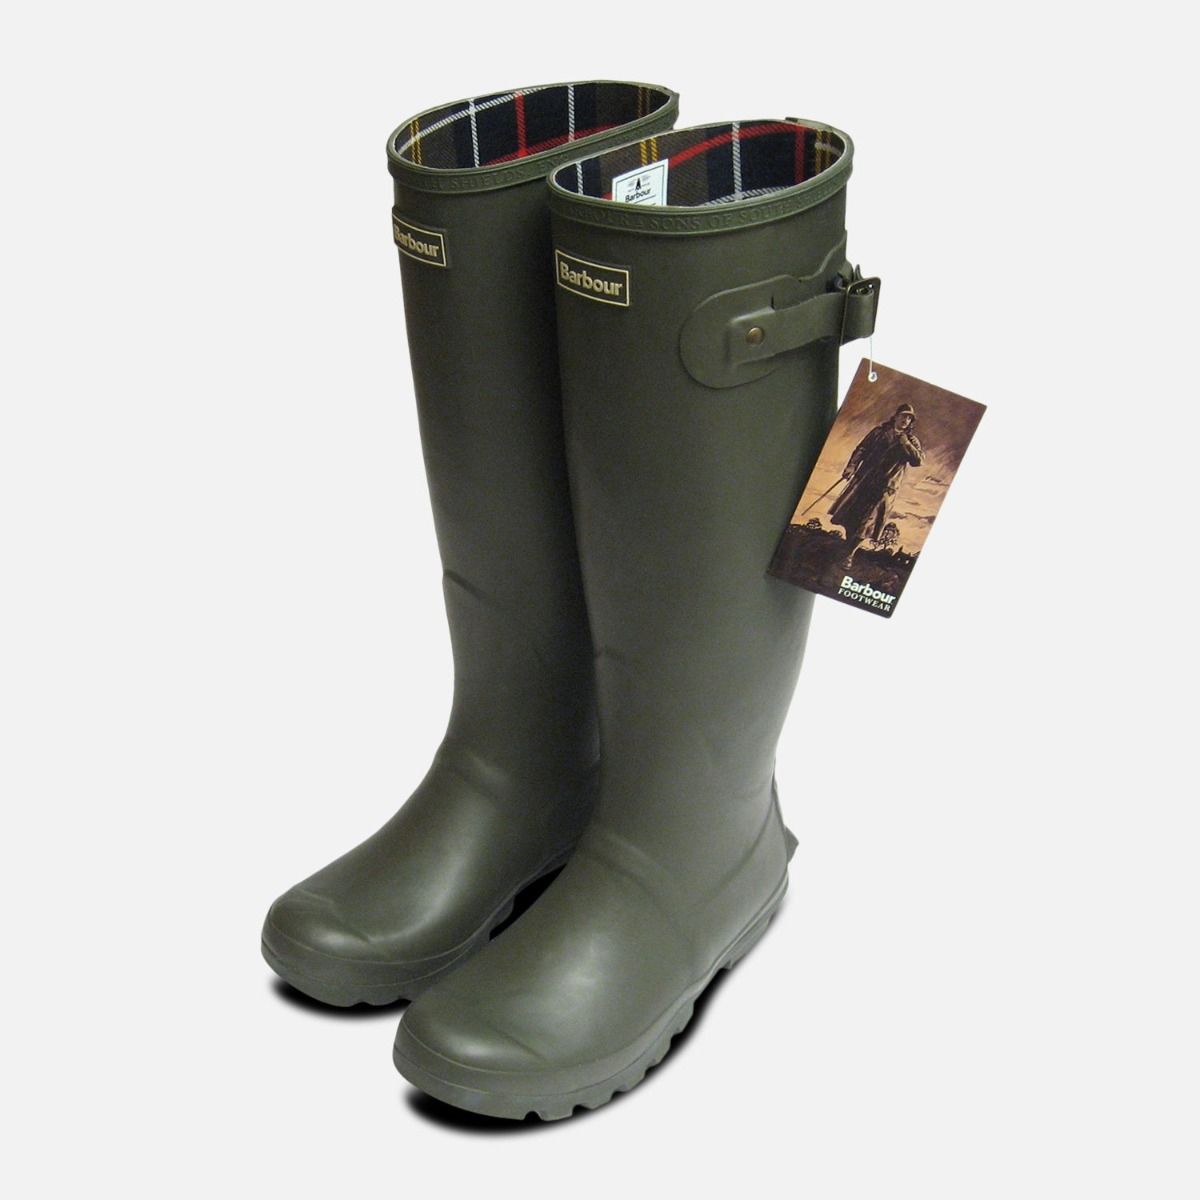 GREEN FISHING WELLINGTON BOOTS WITH THERMAL FLEECE SIZE 7 892-70212 